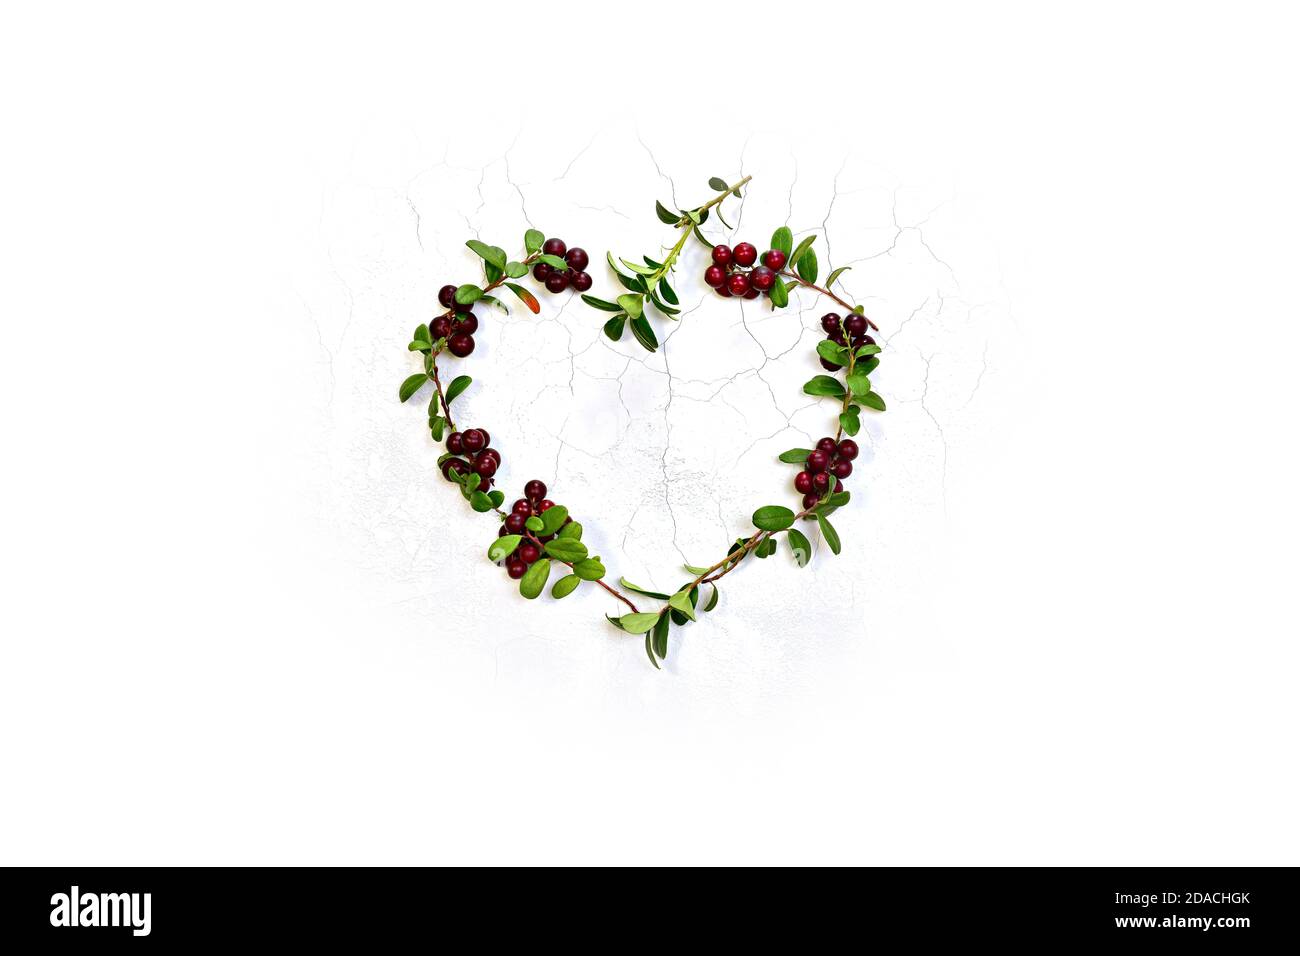 Heart lined with twigs with leaves fresh berries cranberries. On a white texture background. With one empty stem on top. Stock Photo